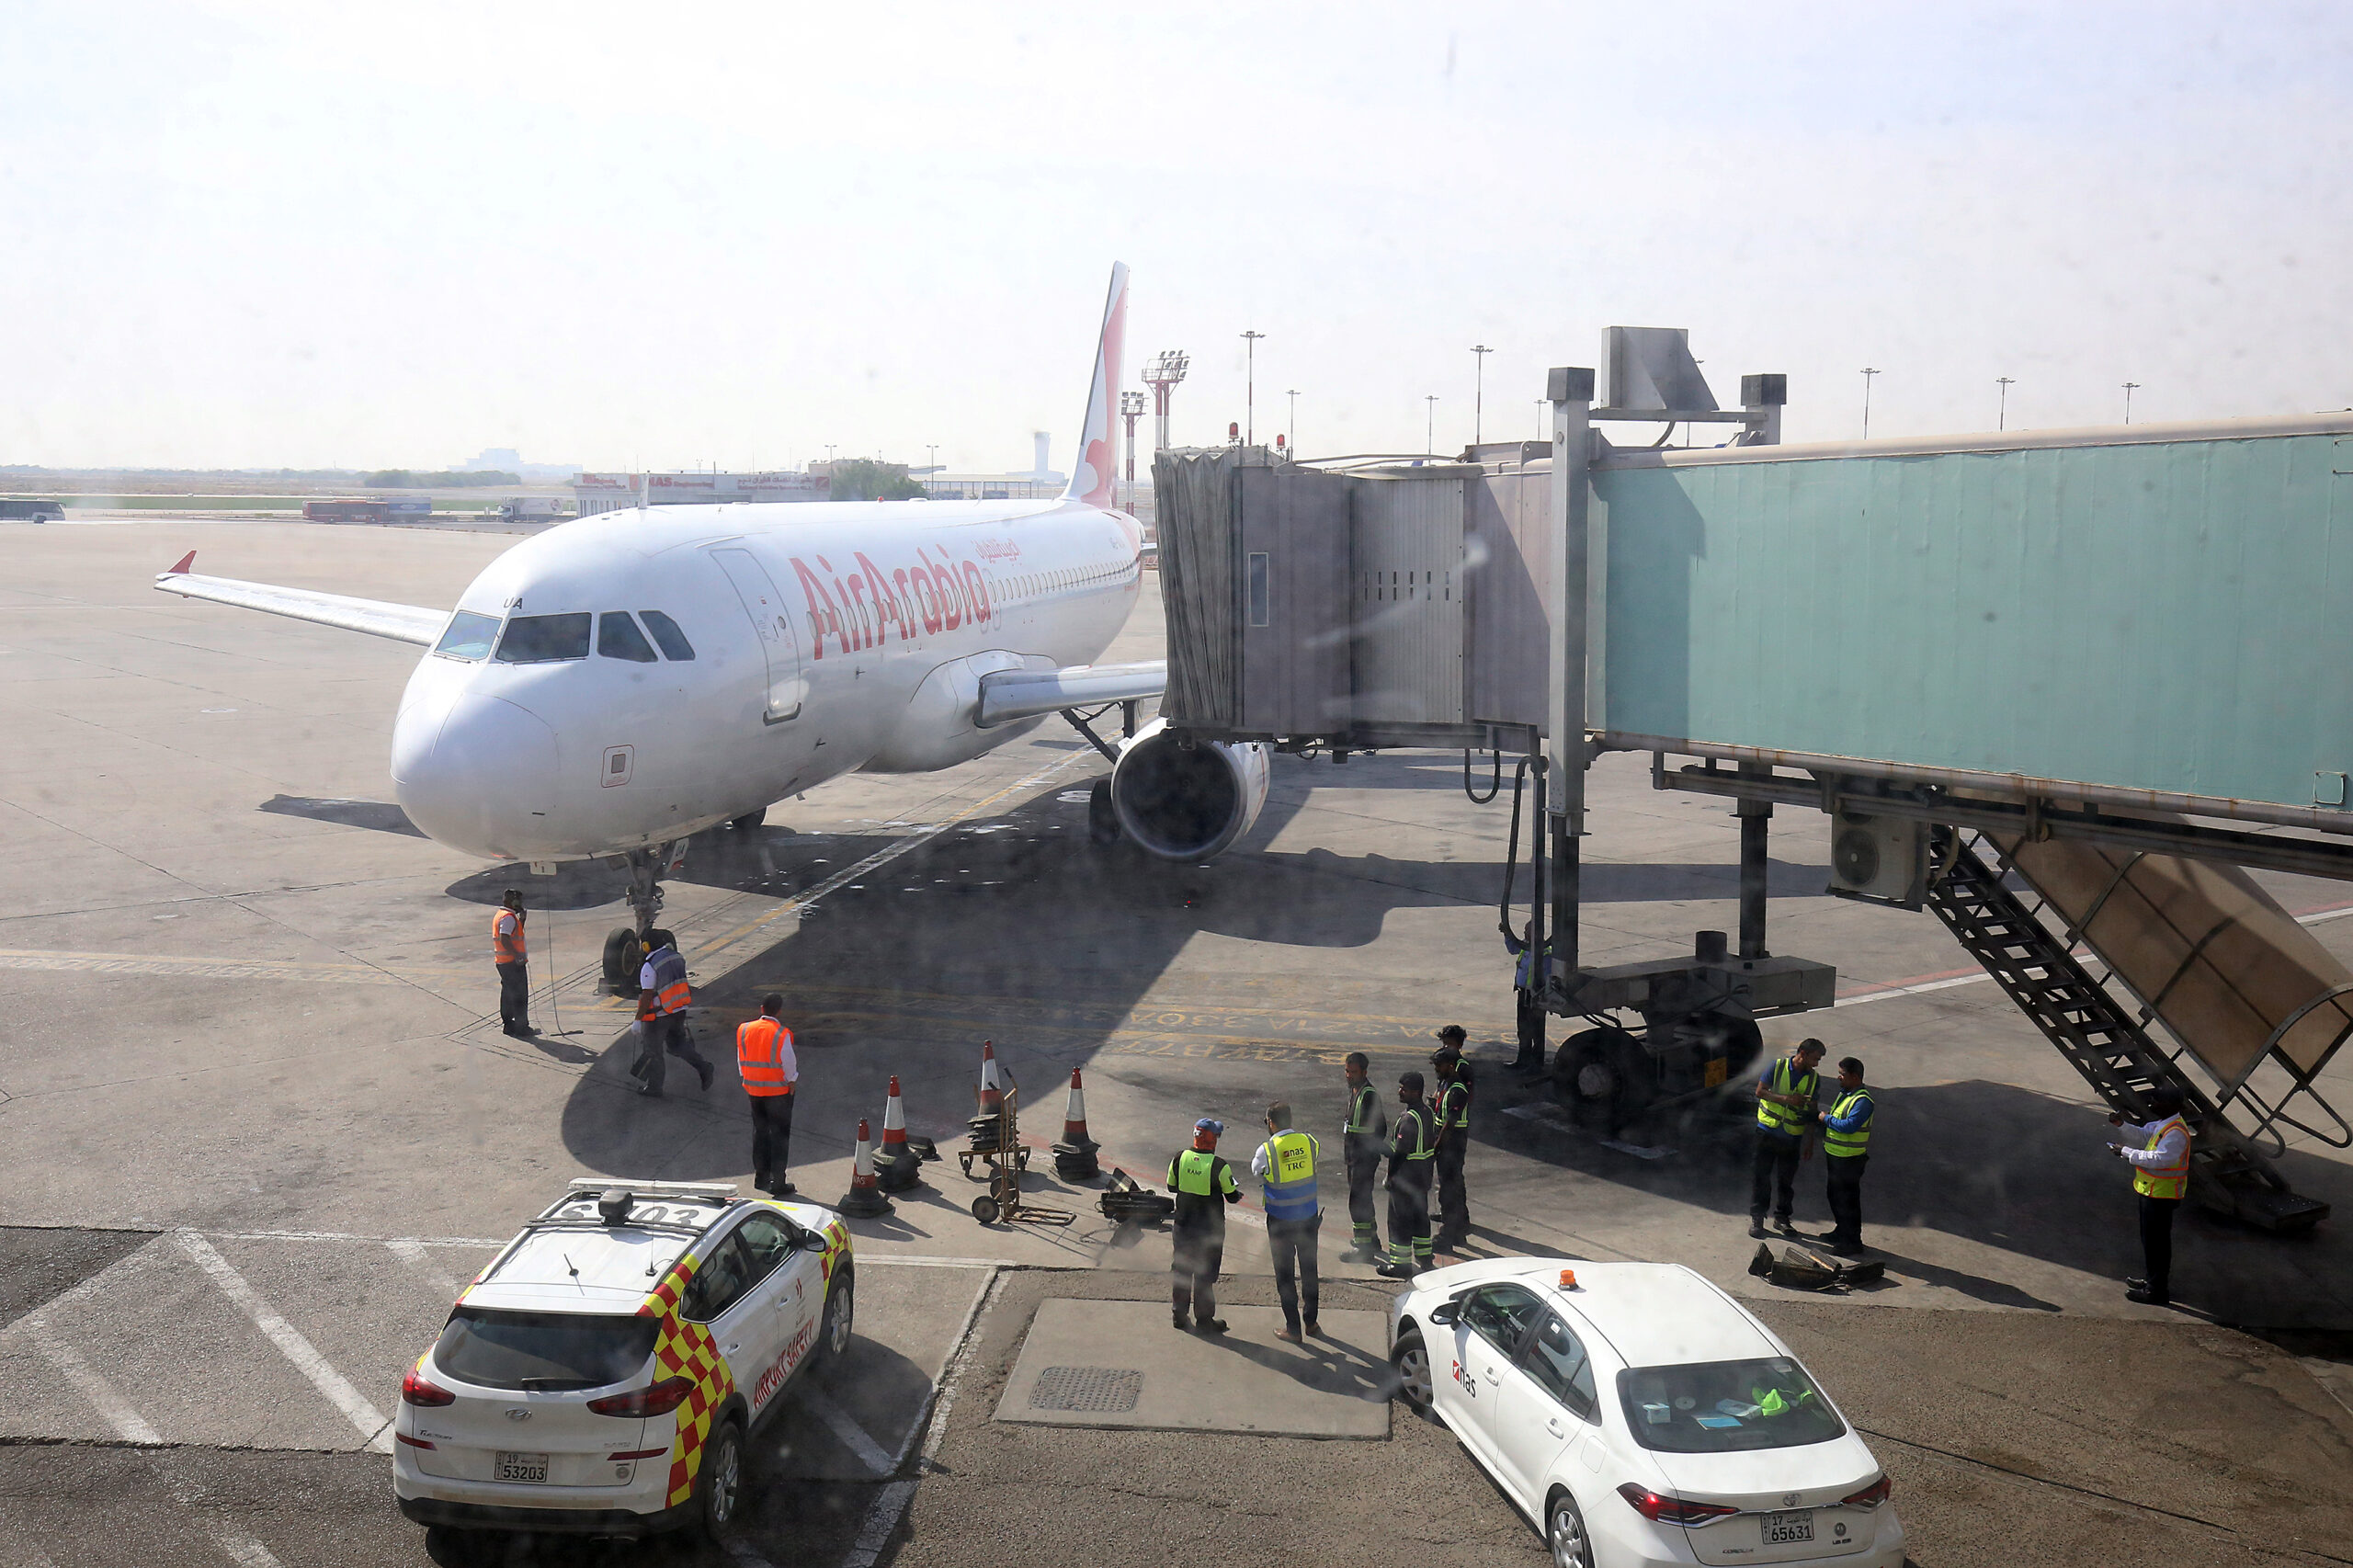 Air Arabia Abu Dhabi marks its first flight to The State of Kuwait